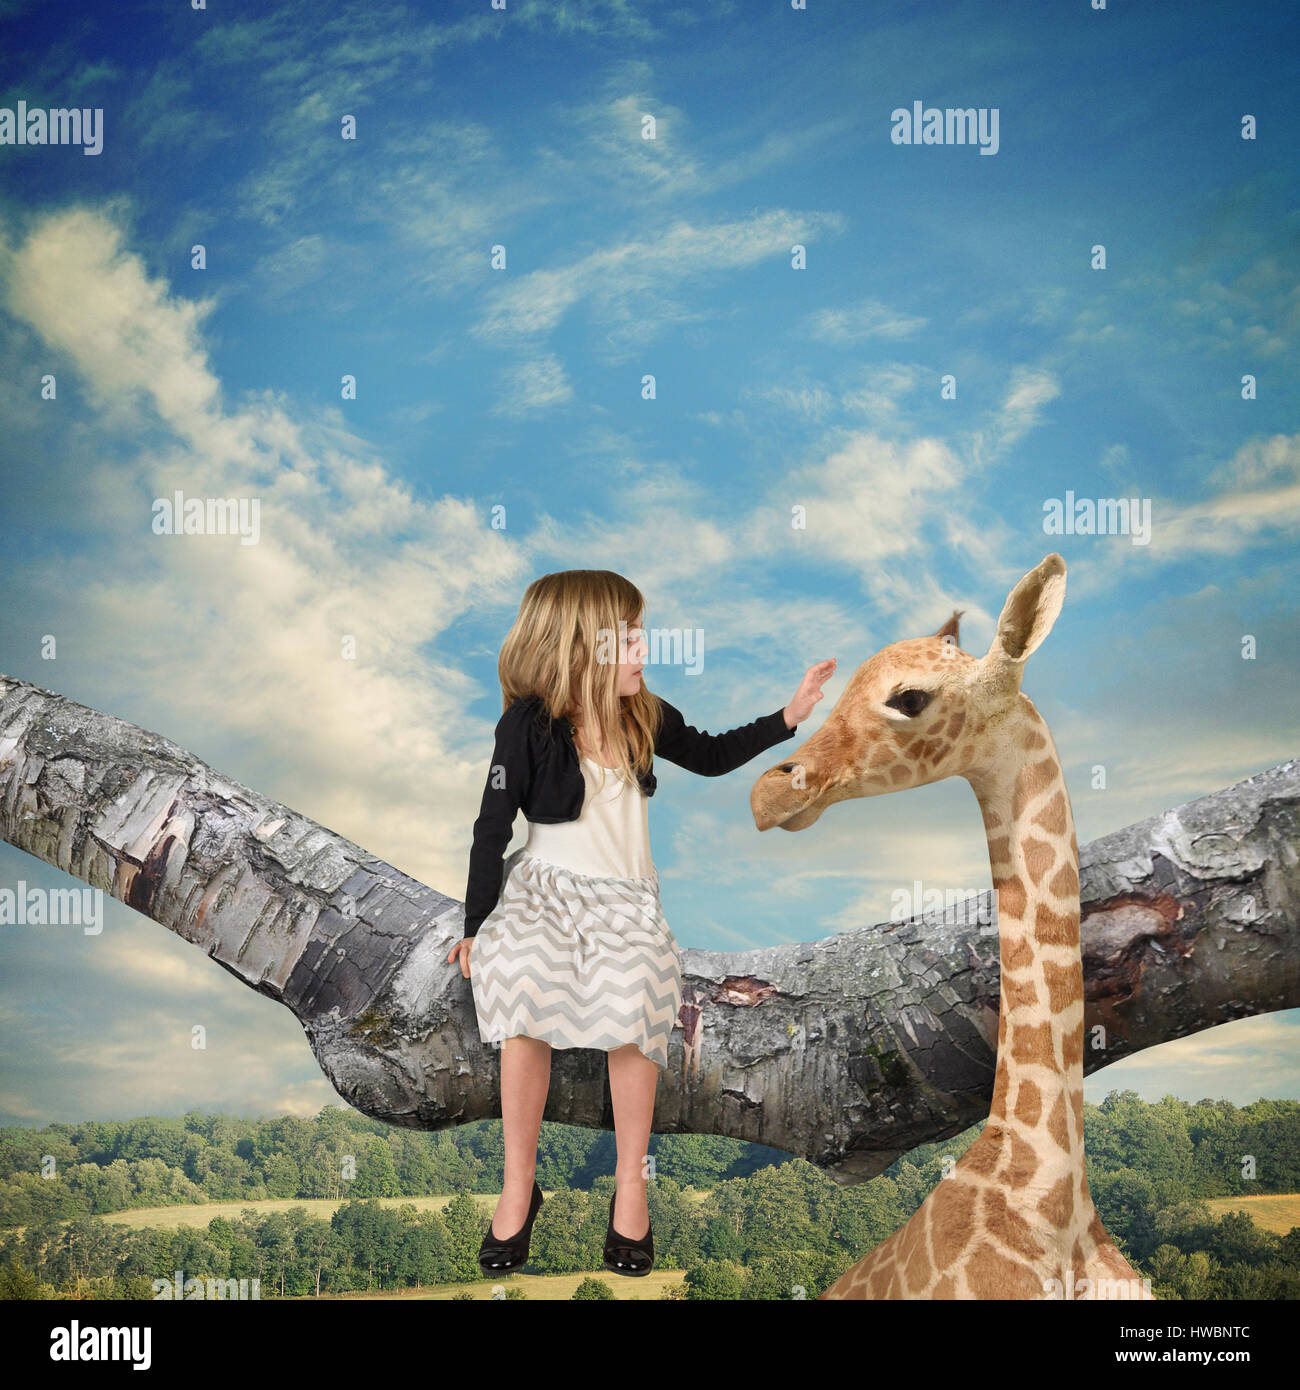 A little child is sitting on a tree branch petting a giraffe up in the sky for an imagination idea about animals in the wild Stock Photo